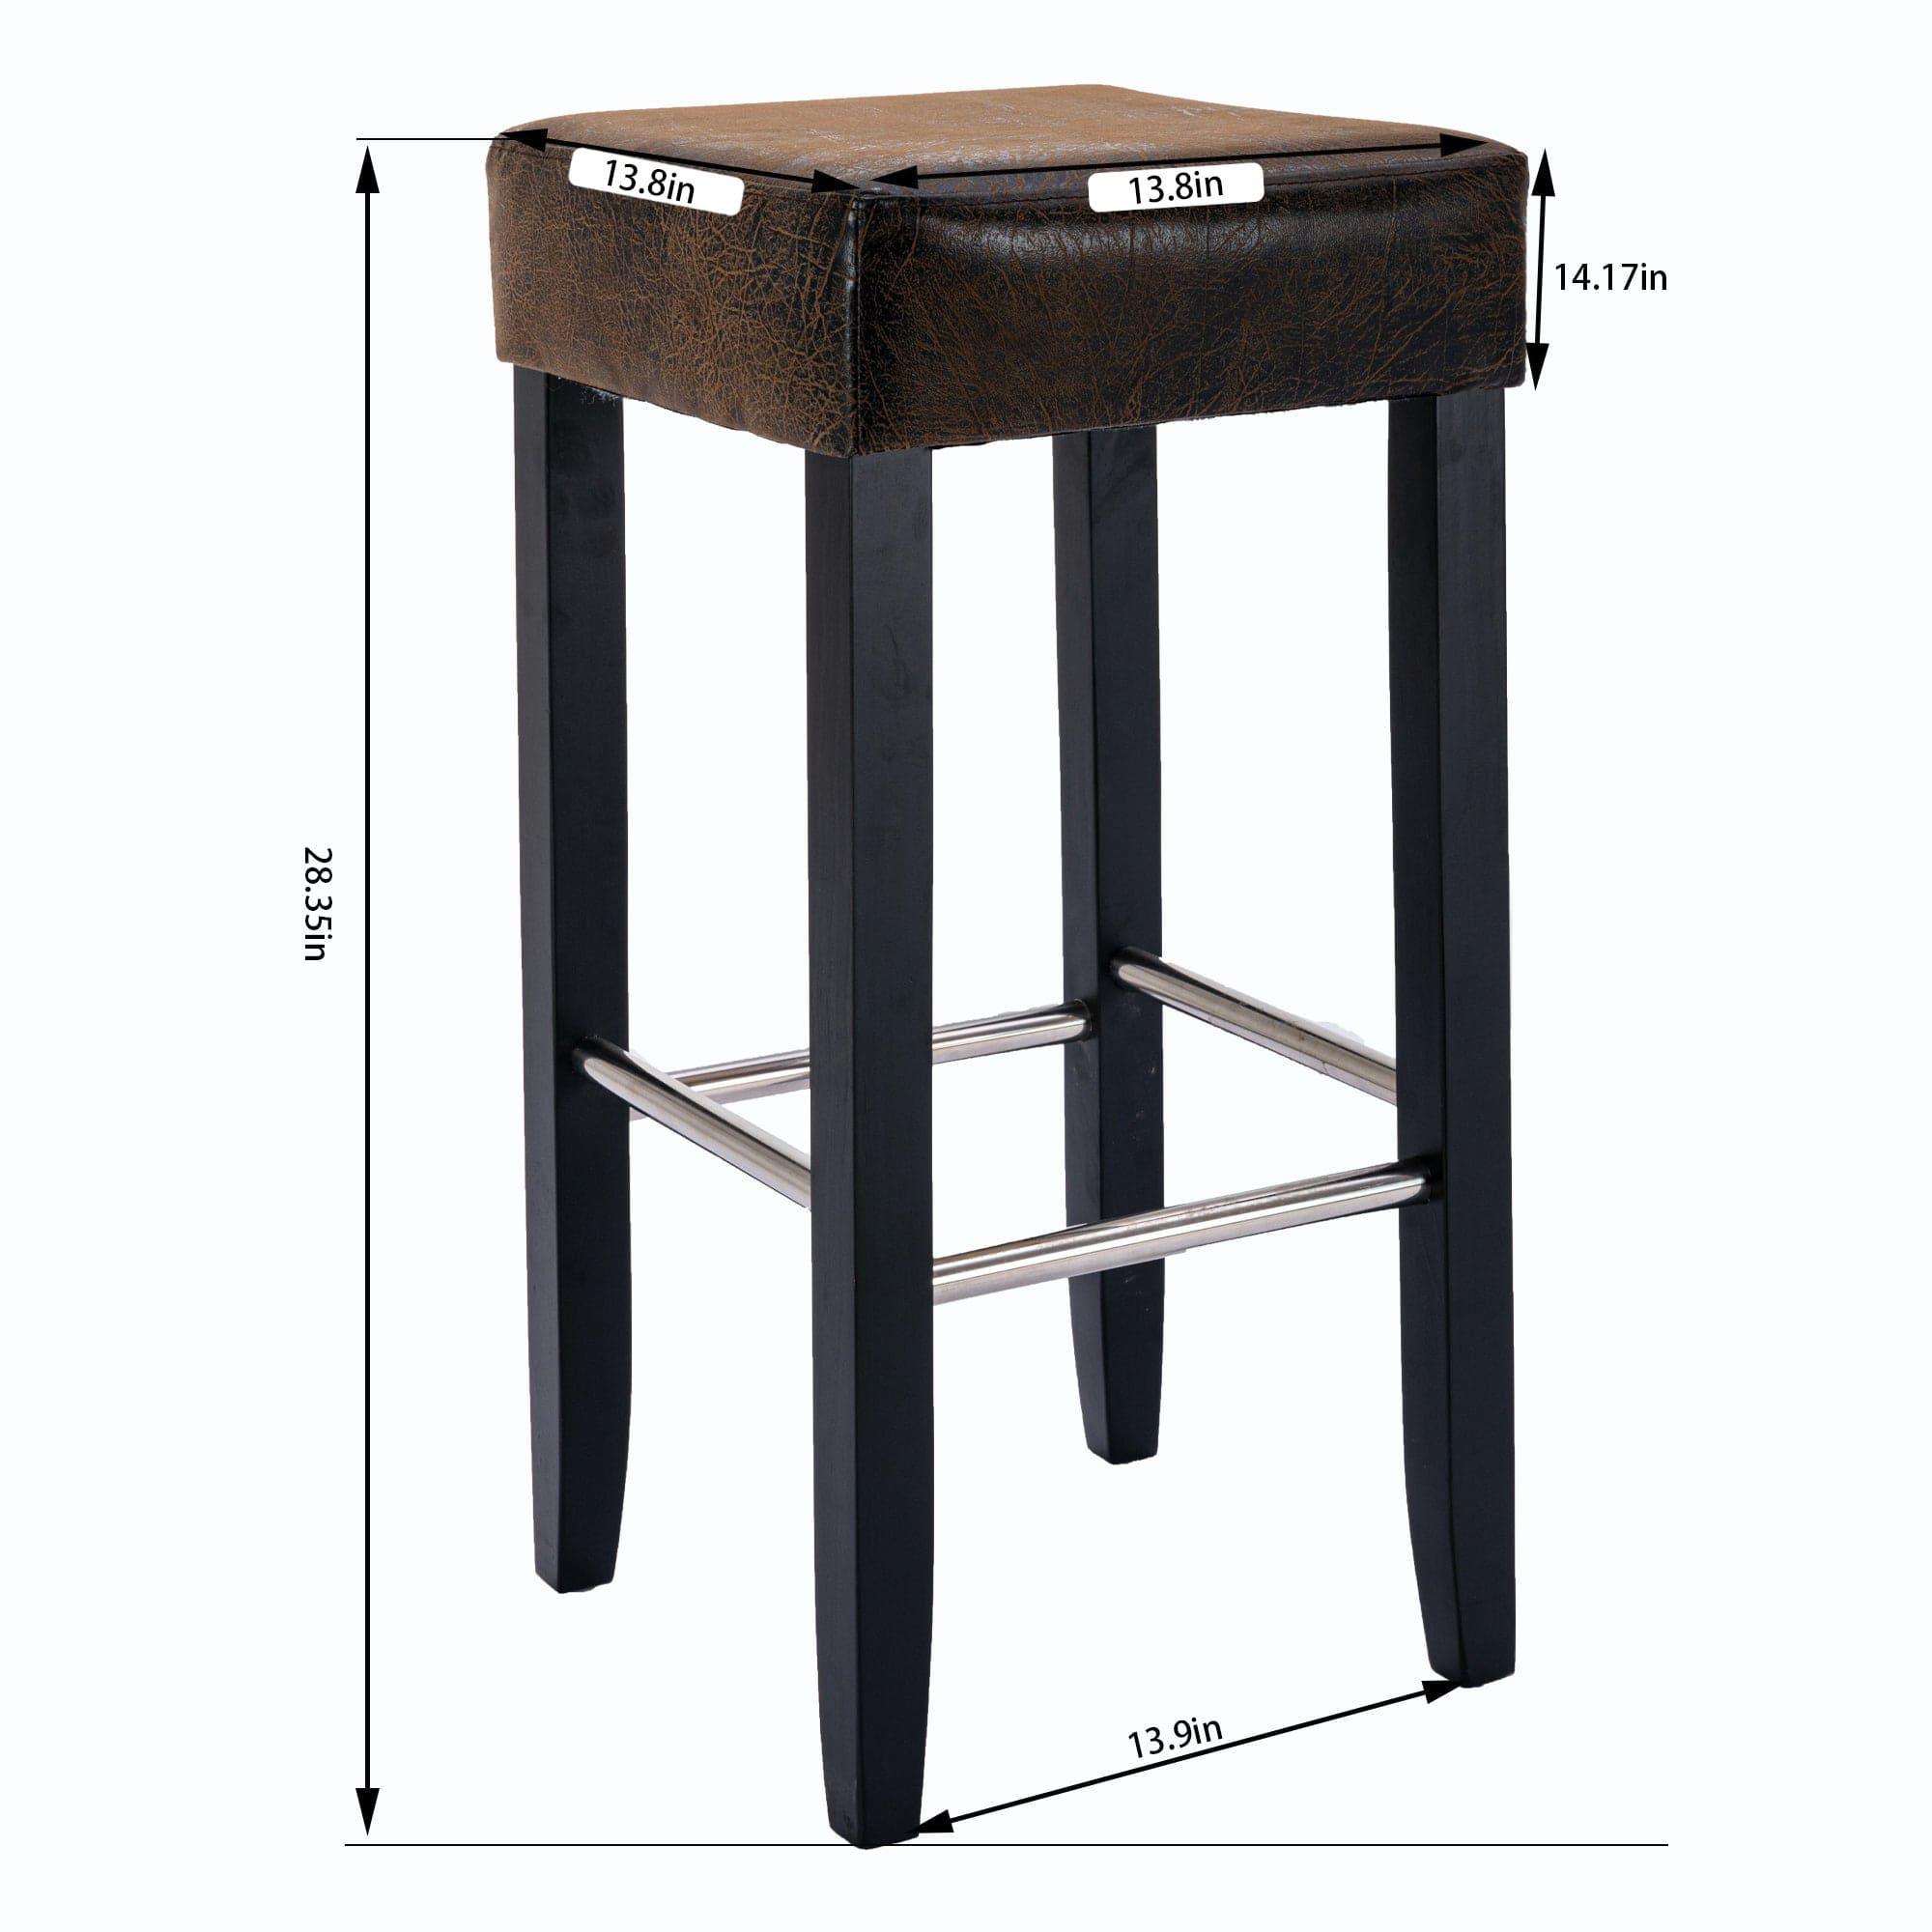 Shop HengMing Barstool in Brown Fabric and Black Wood Finish,2-Pcs Set Mademoiselle Home Decor